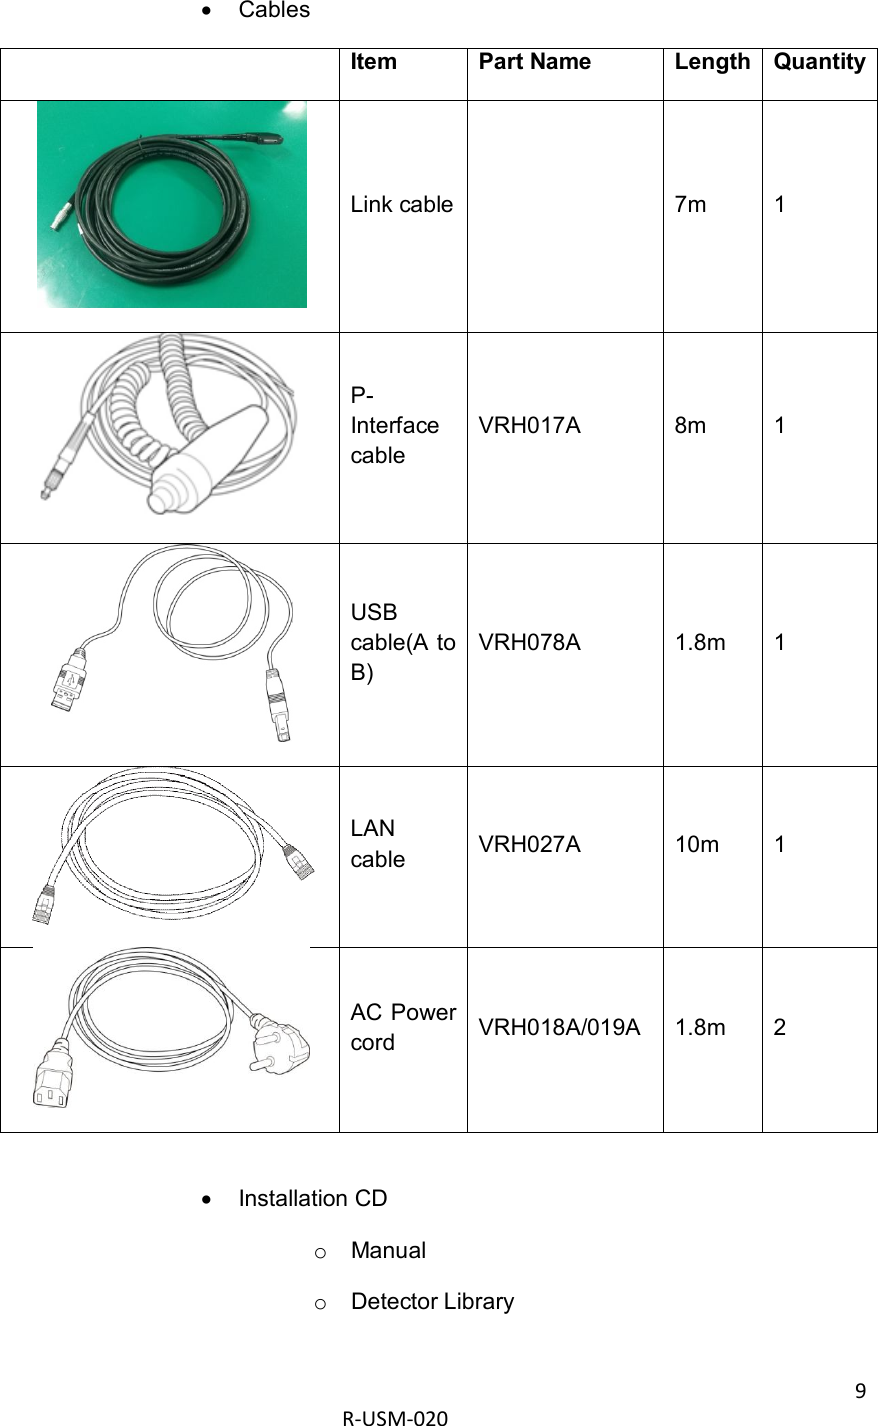 9  R-USM-020          Cables  Item Part Name Length Quantity  Link cable   7m  1  P-Interface cable VRH017A  8m  1  USB cable(A to B) VRH078A  1.8m  1  LAN cable  VRH027A  10m  1  AC Power cord  VRH018A/019A  1.8m  2    Installation CD o  Manual o  Detector Library  